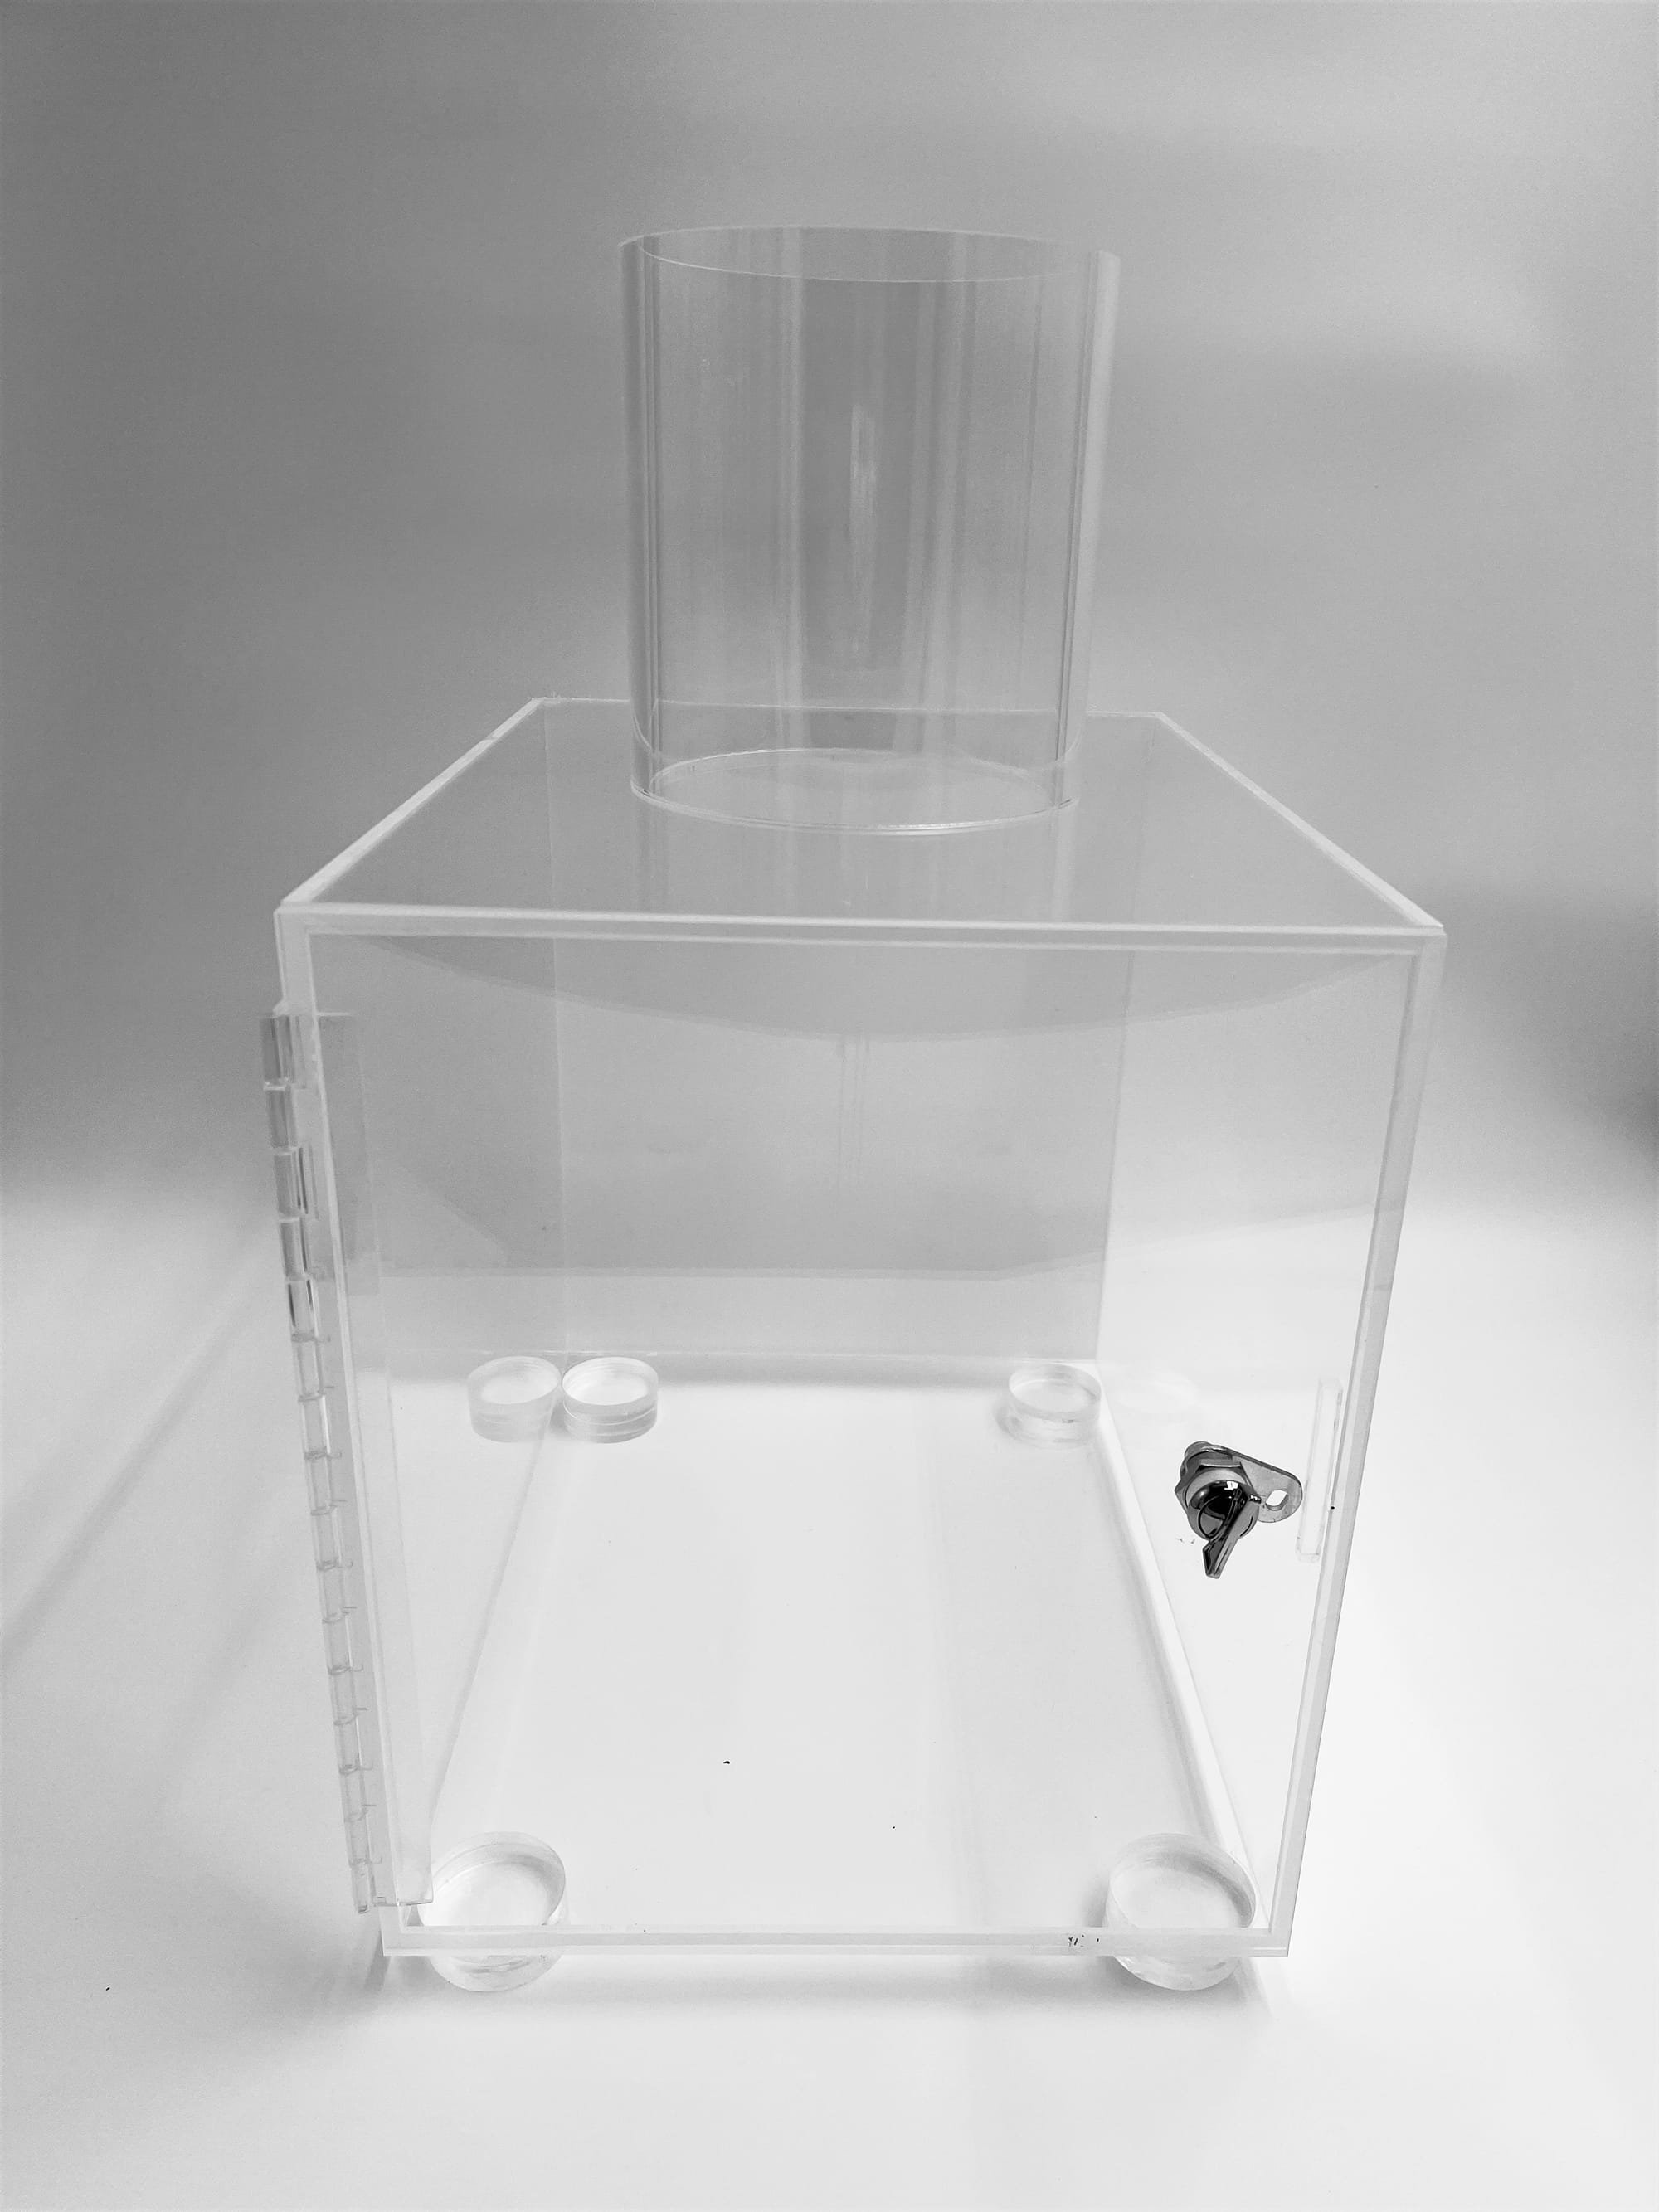 Clear Acrylic Air Tight Scientific Research Compartment With Hinged Door and Lock